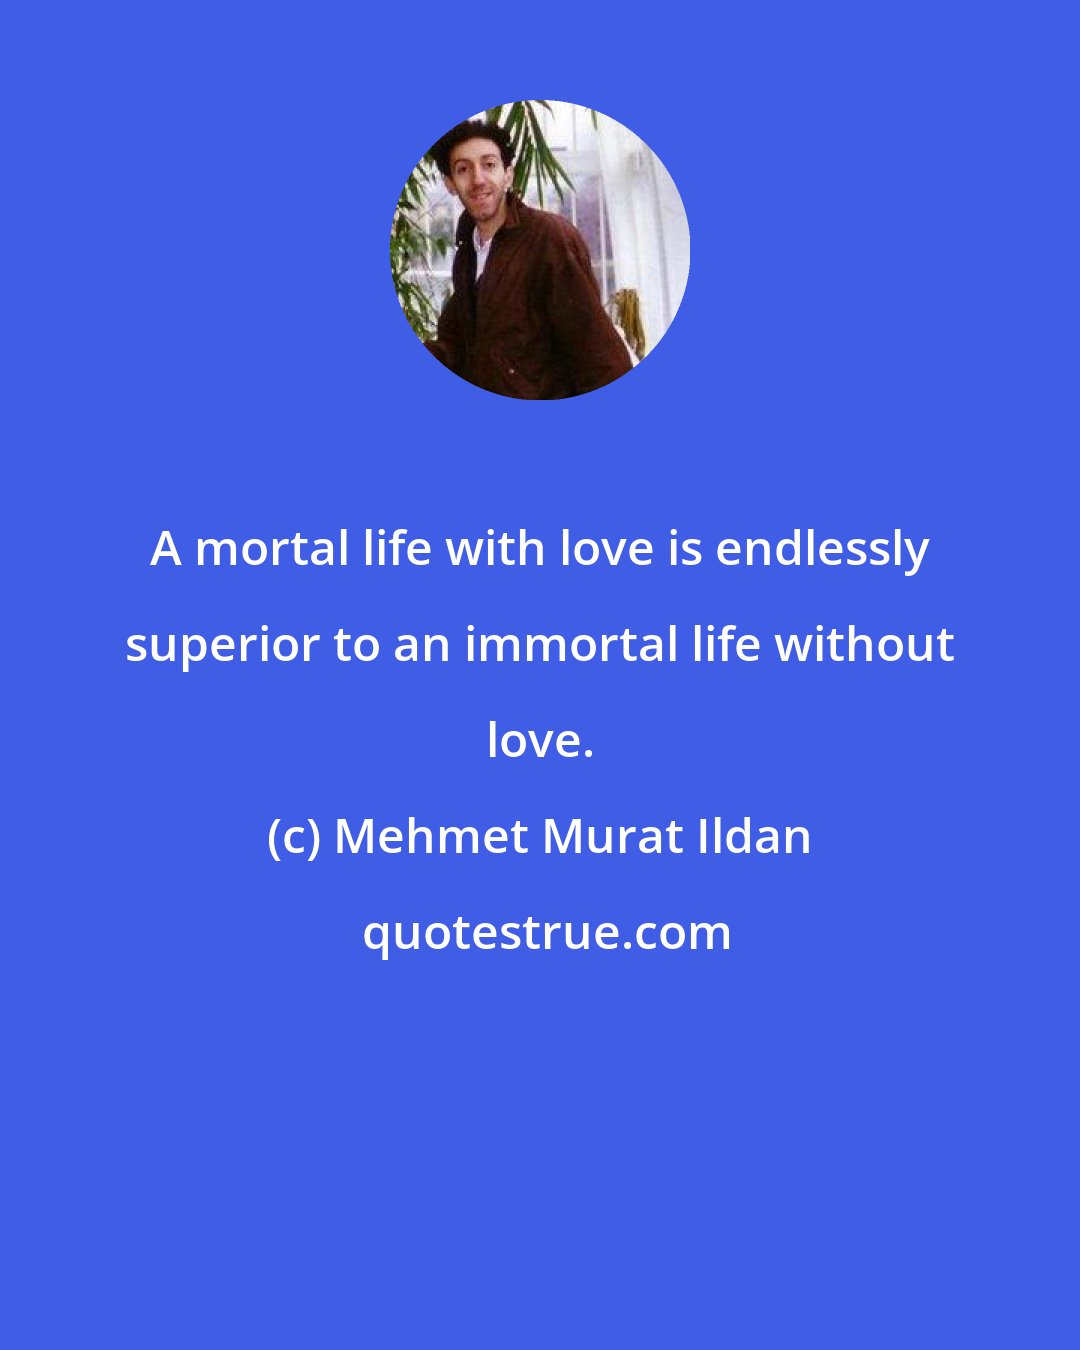 Mehmet Murat Ildan: A mortal life with love is endlessly superior to an immortal life without love.